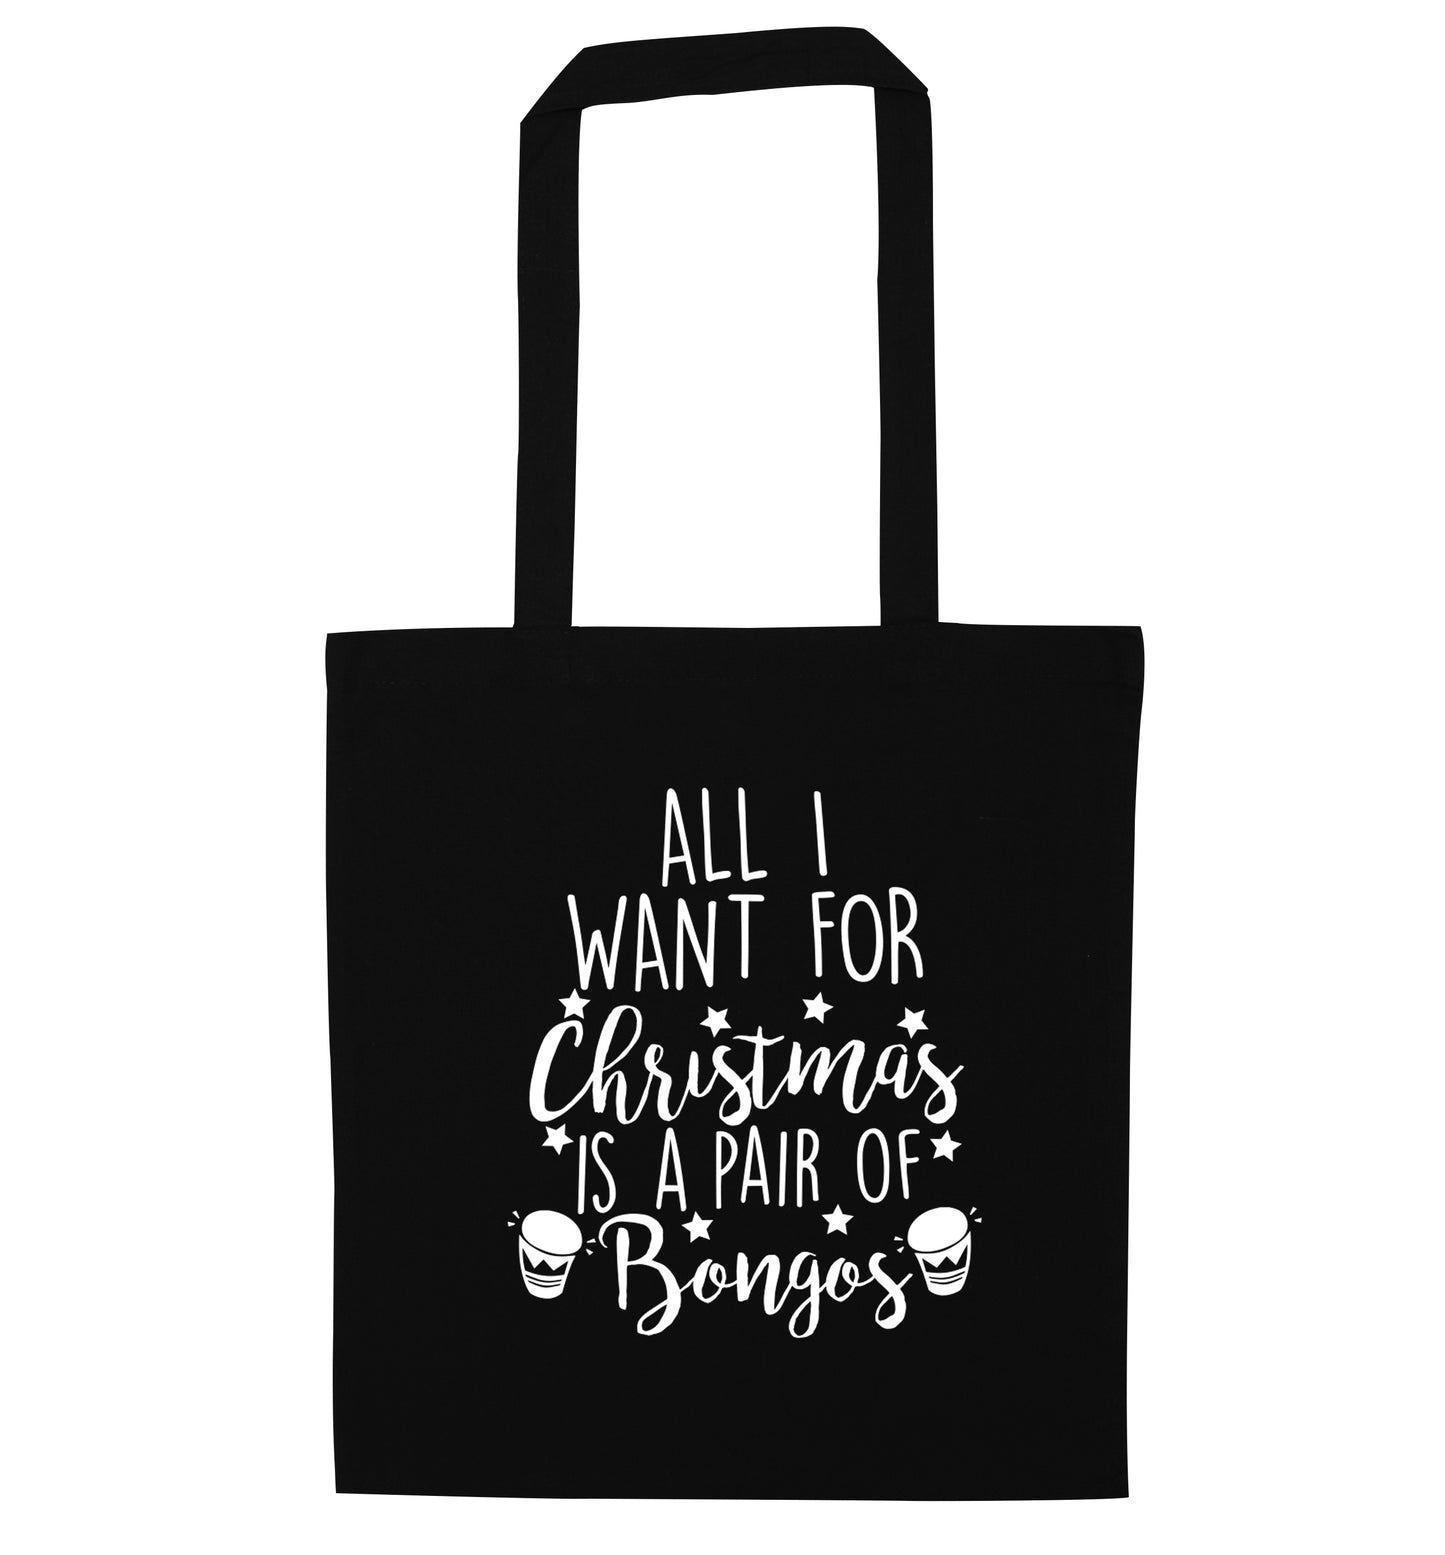 All I want for Christmas is a pair of bongos! black tote bag